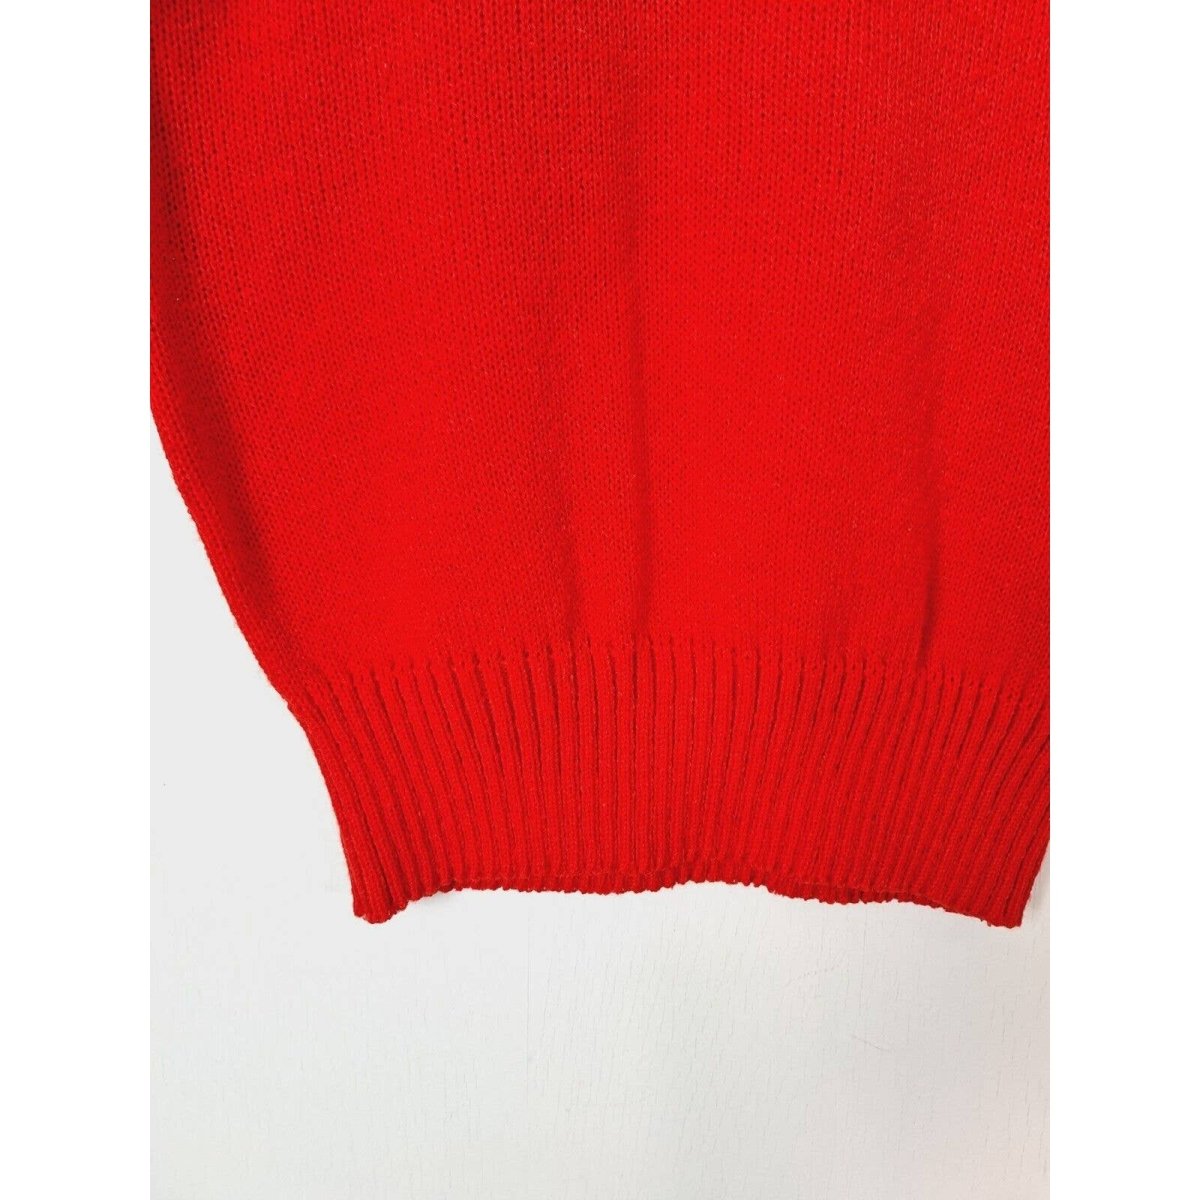 Vintage 70s/80s Red Pullover Crewneck Sweater Size XS/S - themallvintage The Mall Vintage